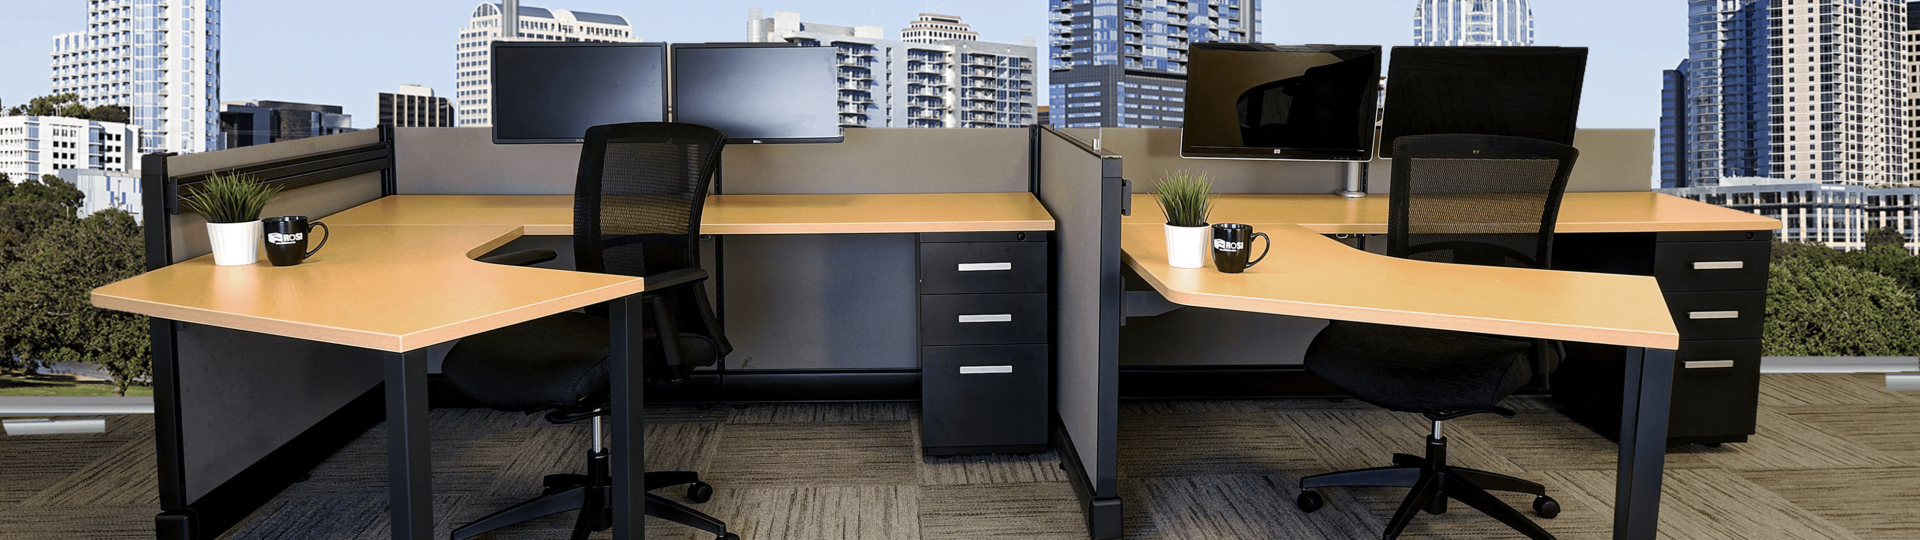 ROSI rent office cubicles